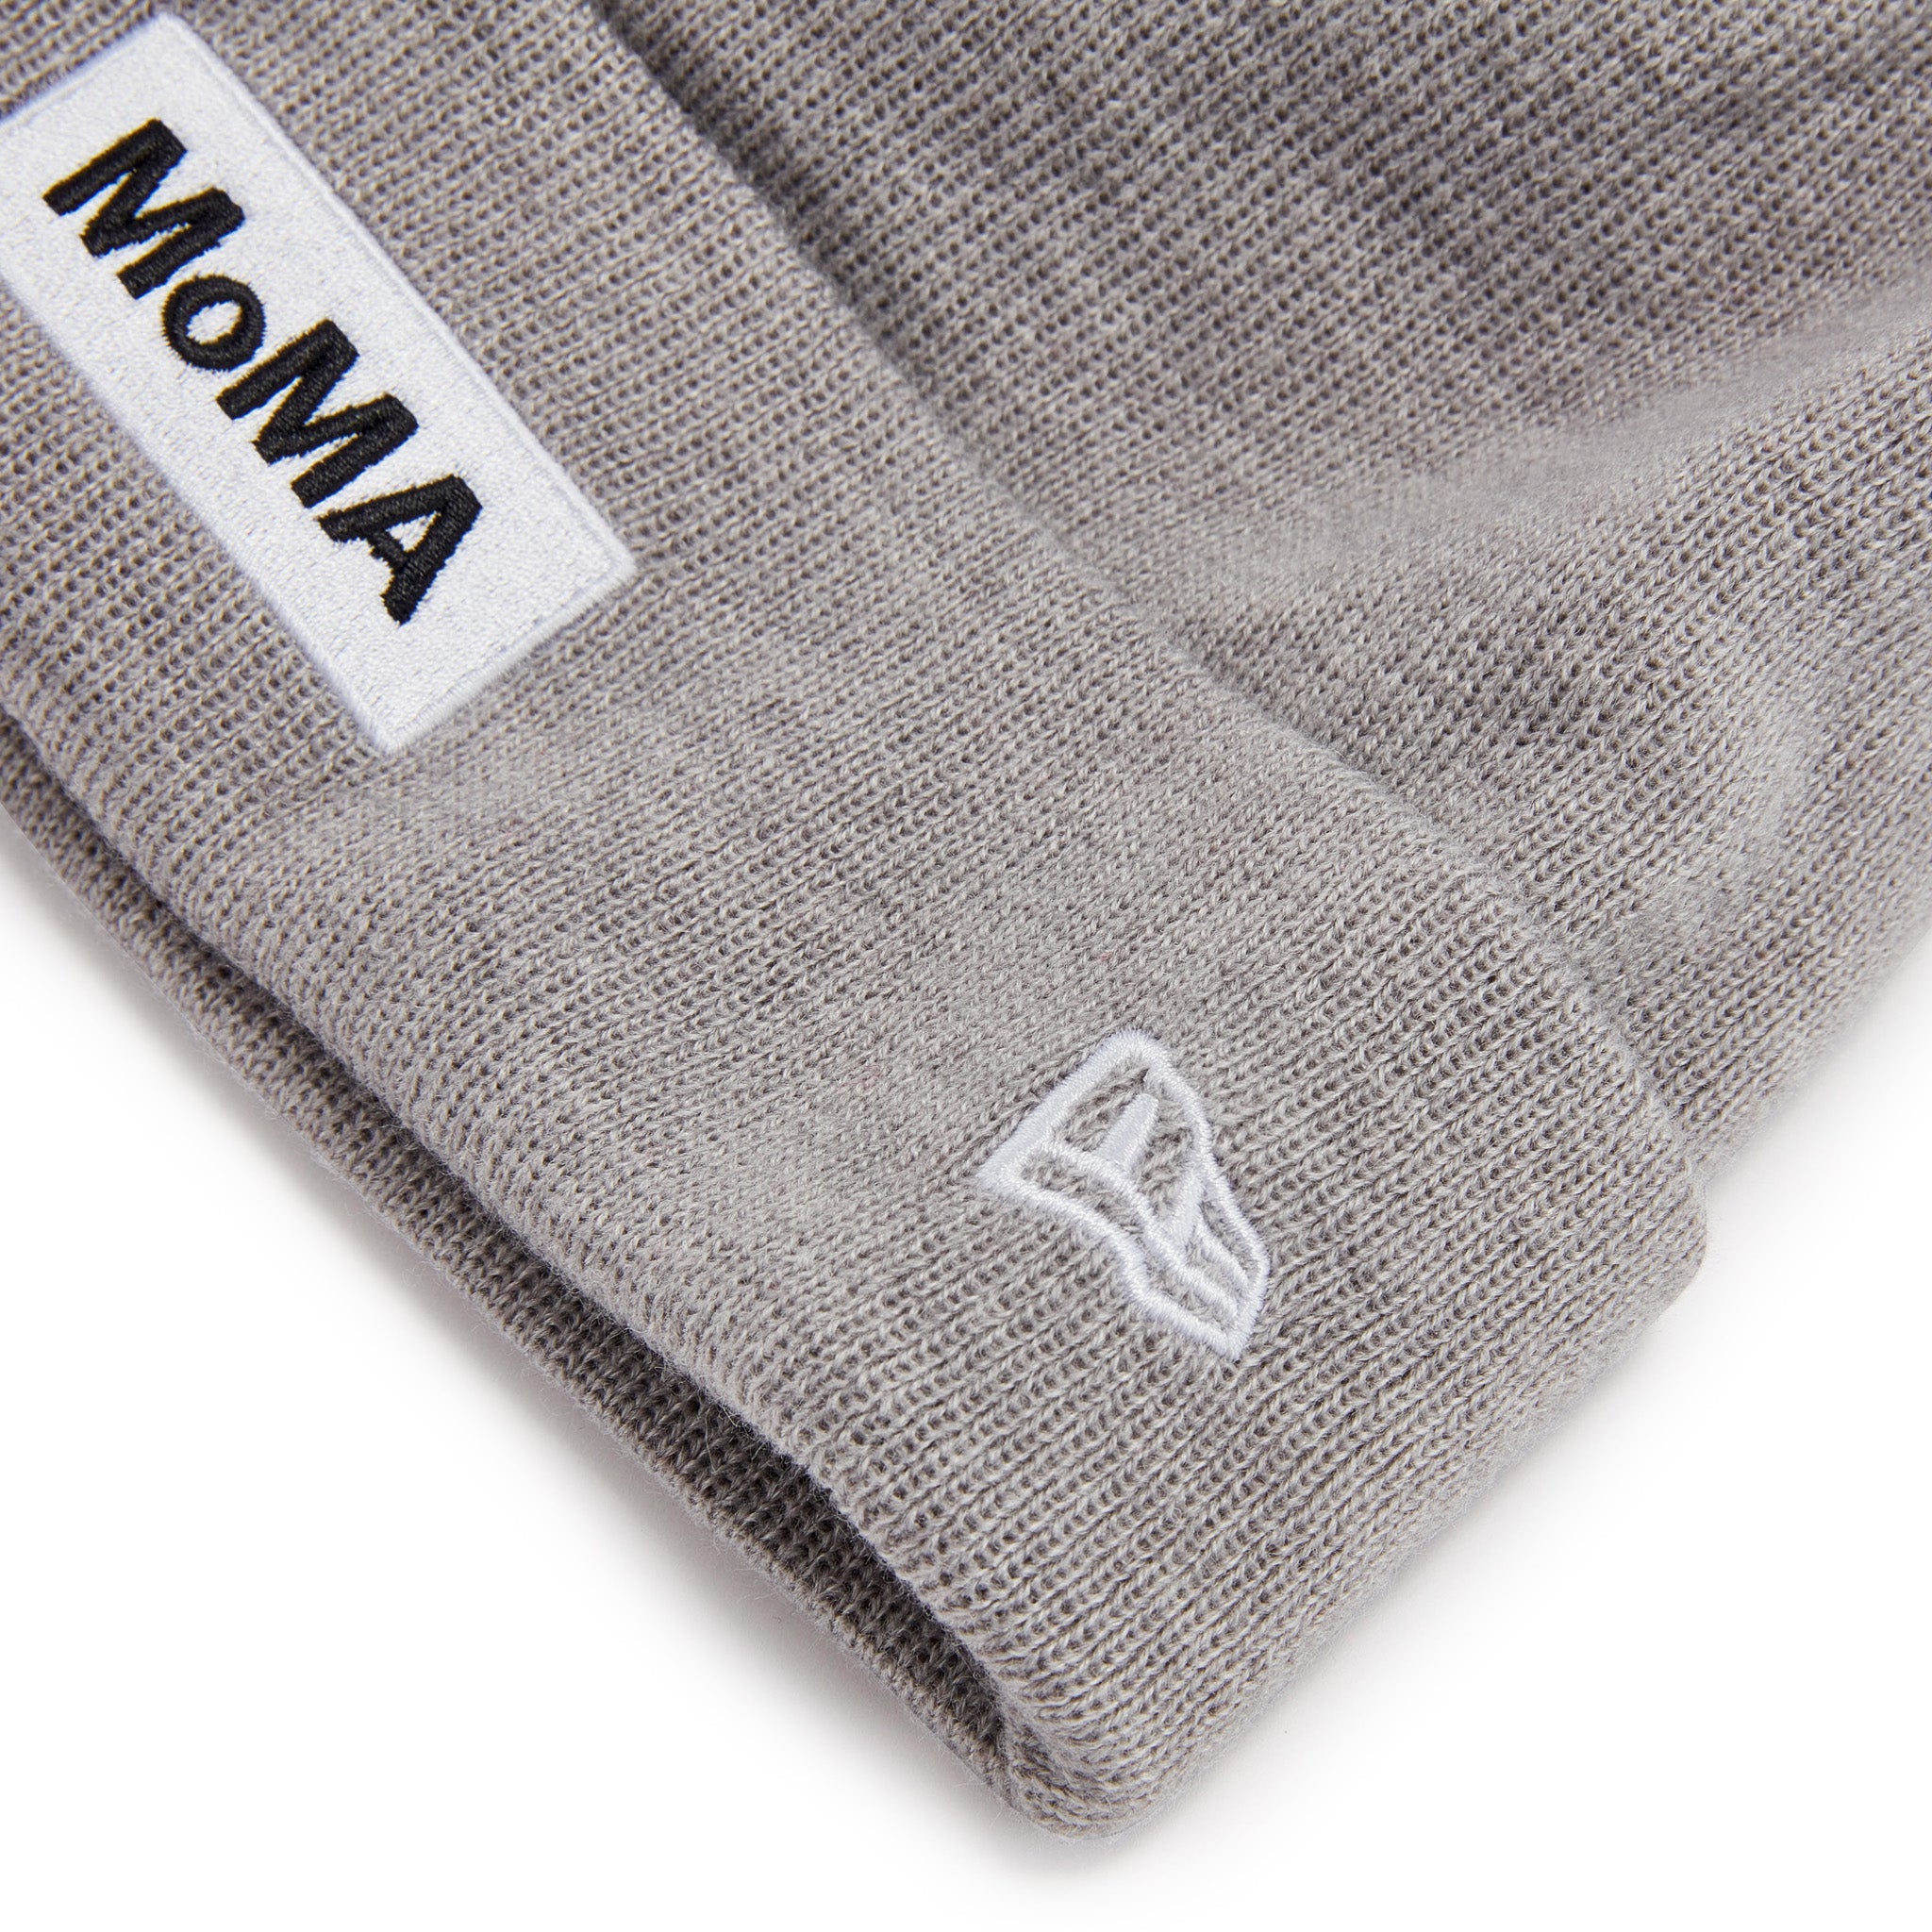 Moma Beanie | One Size | Red